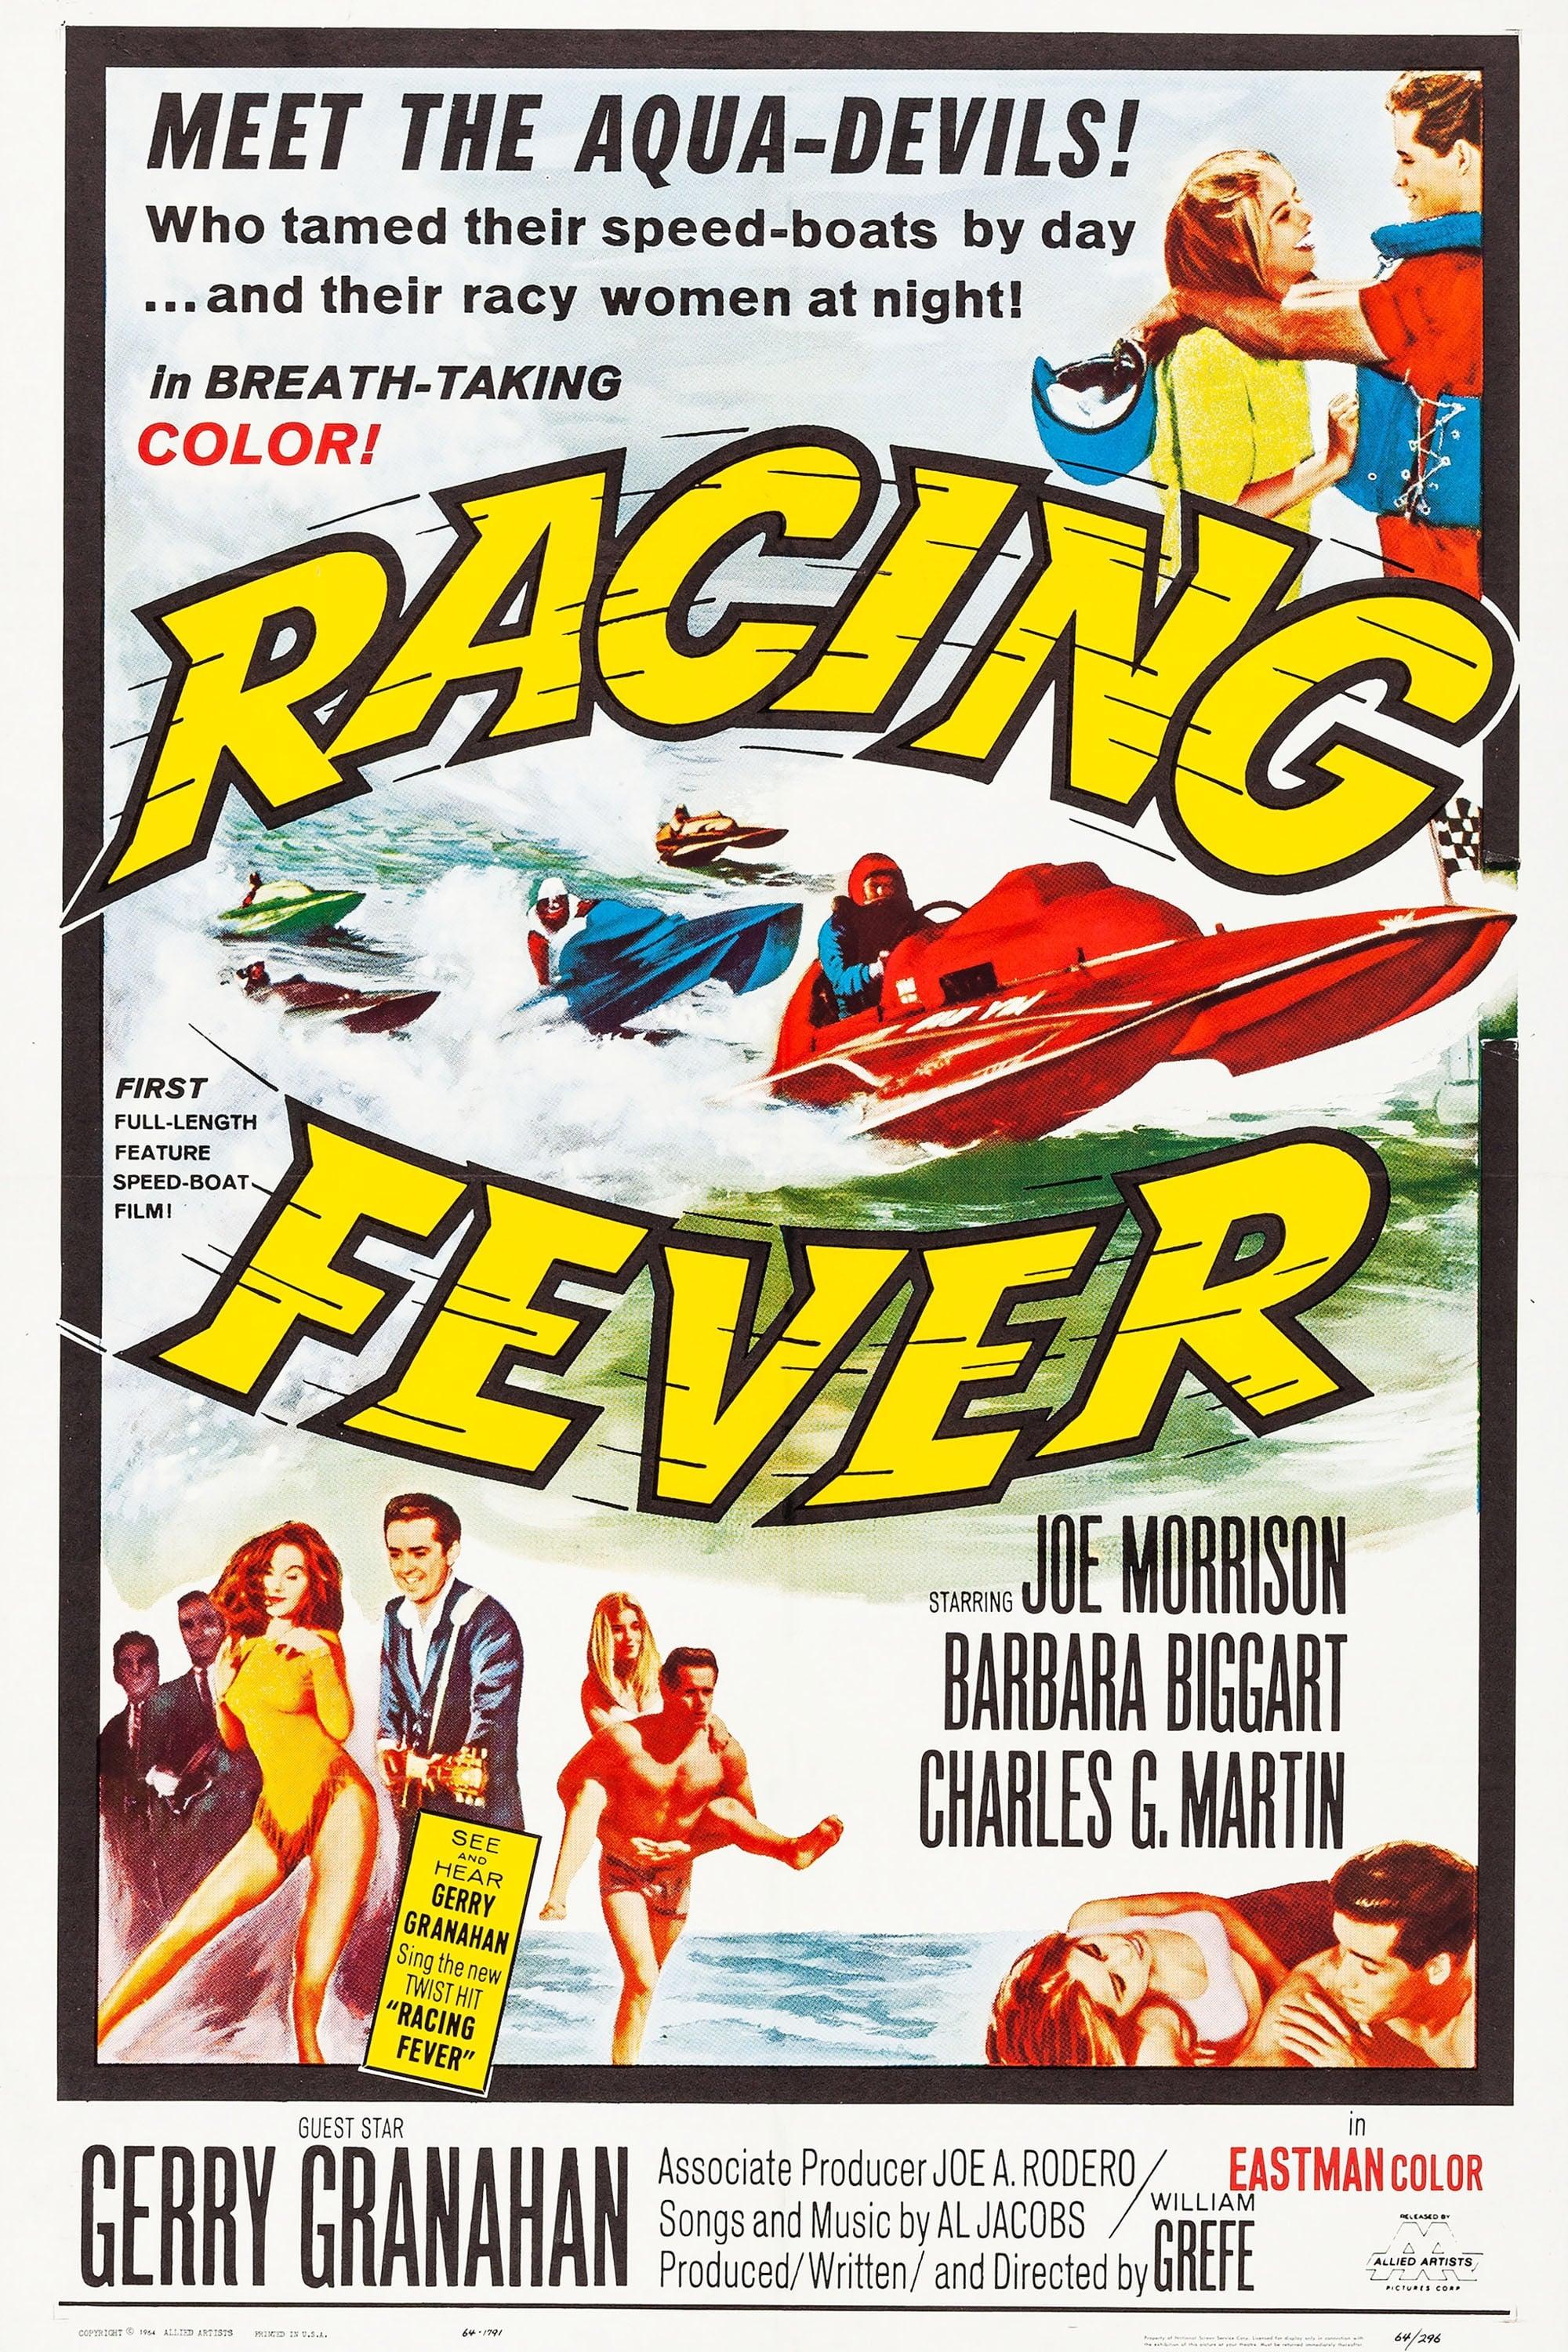 Racing Fever poster